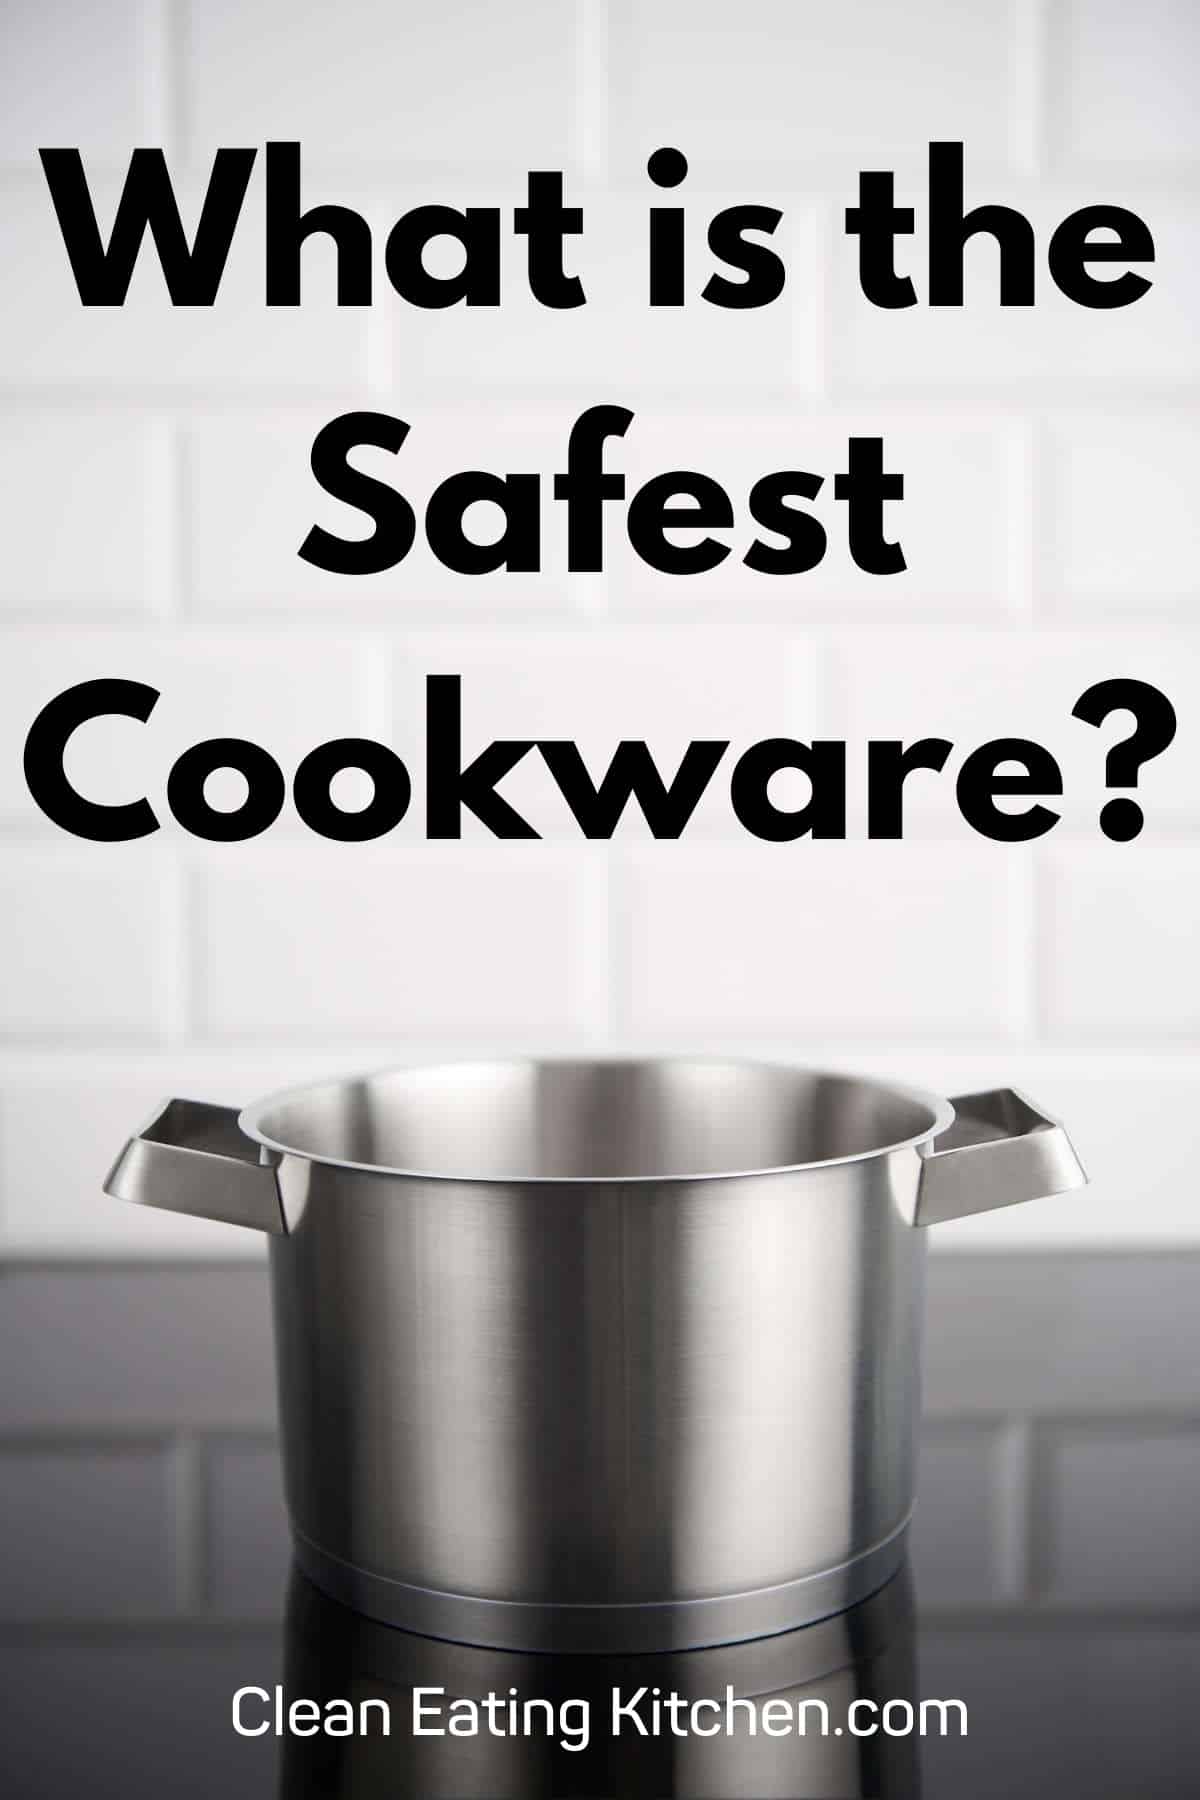 infographic with text that says what is the safest cookware?